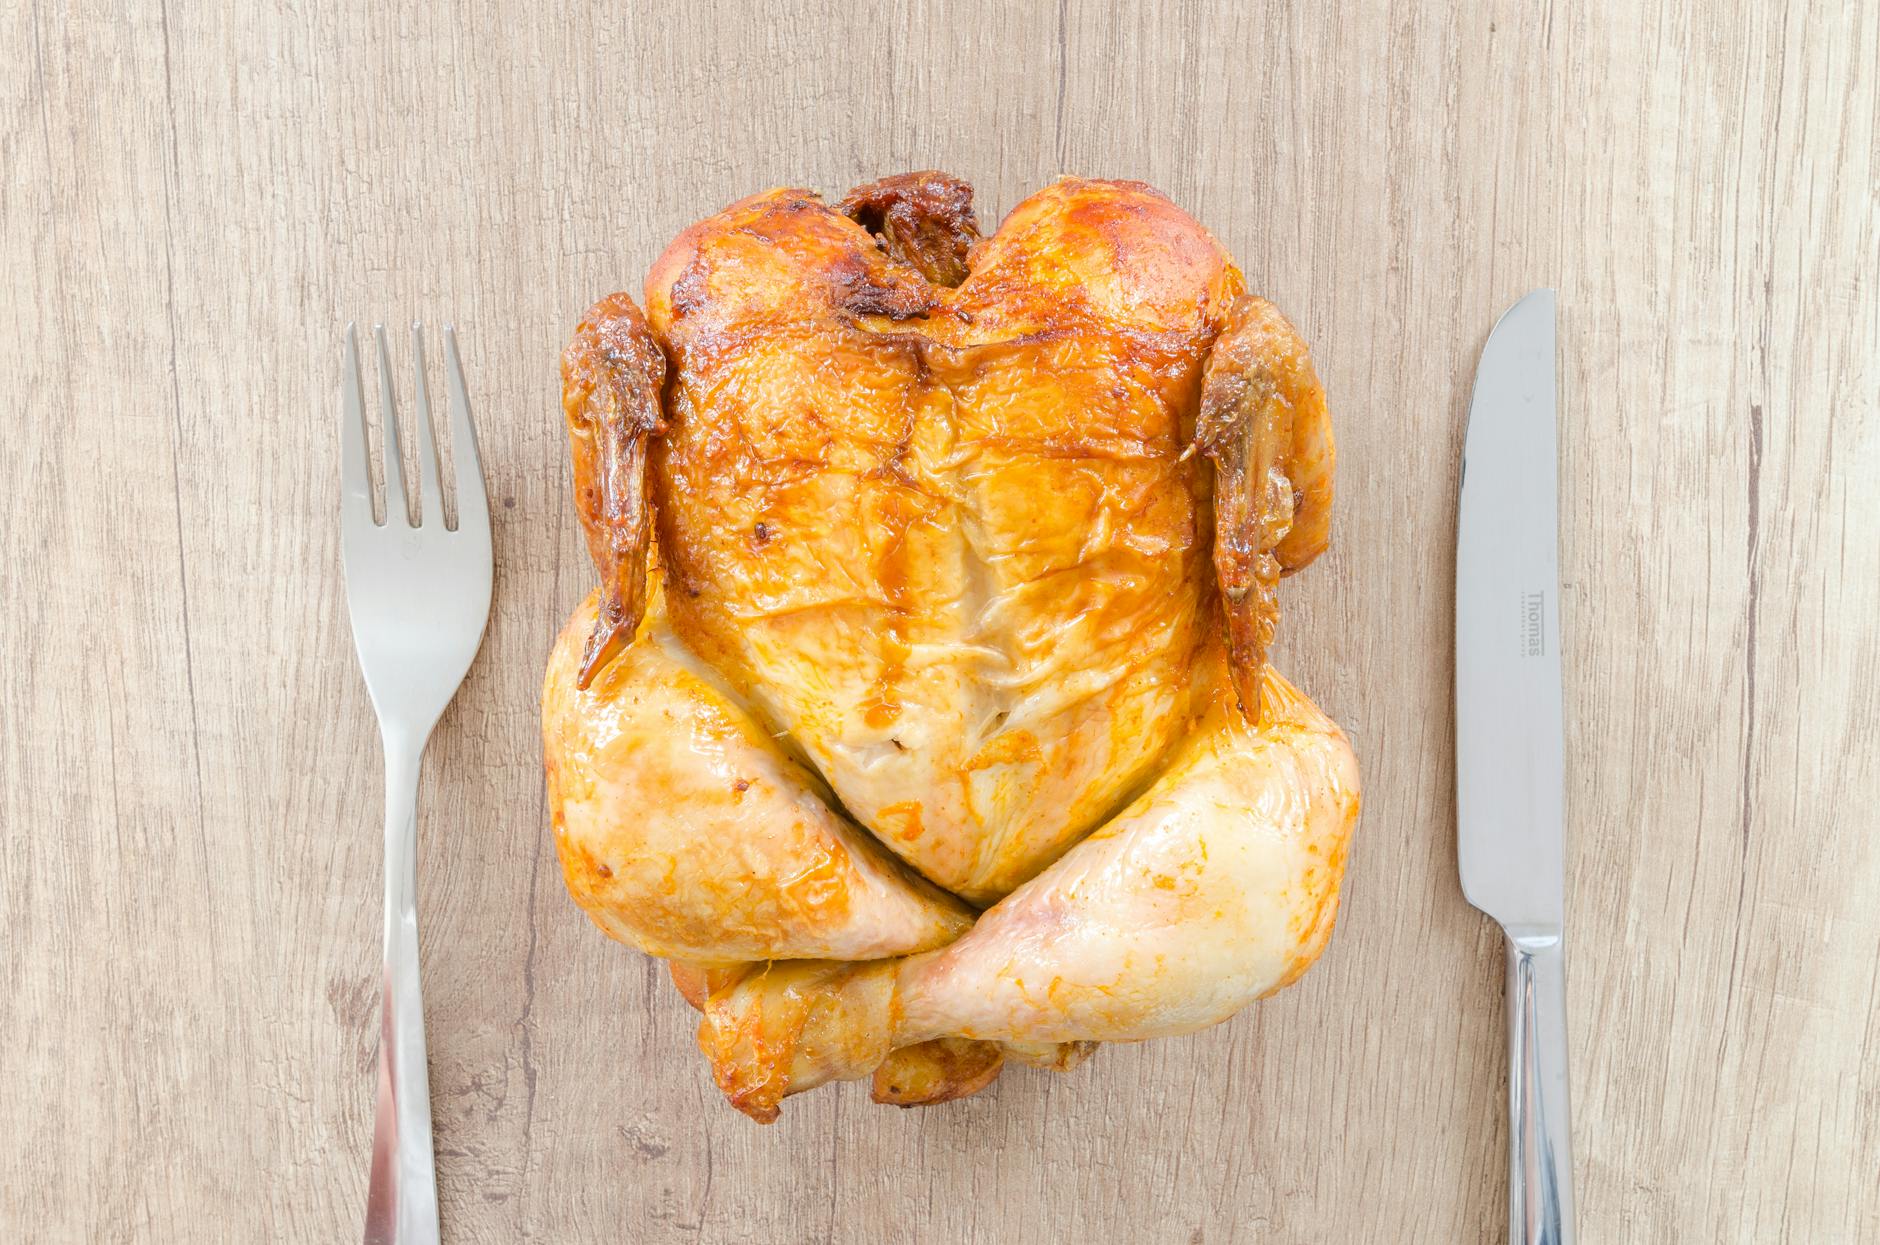 How To Safely Store Cooked Chicken In The Fridge | Fridge.com